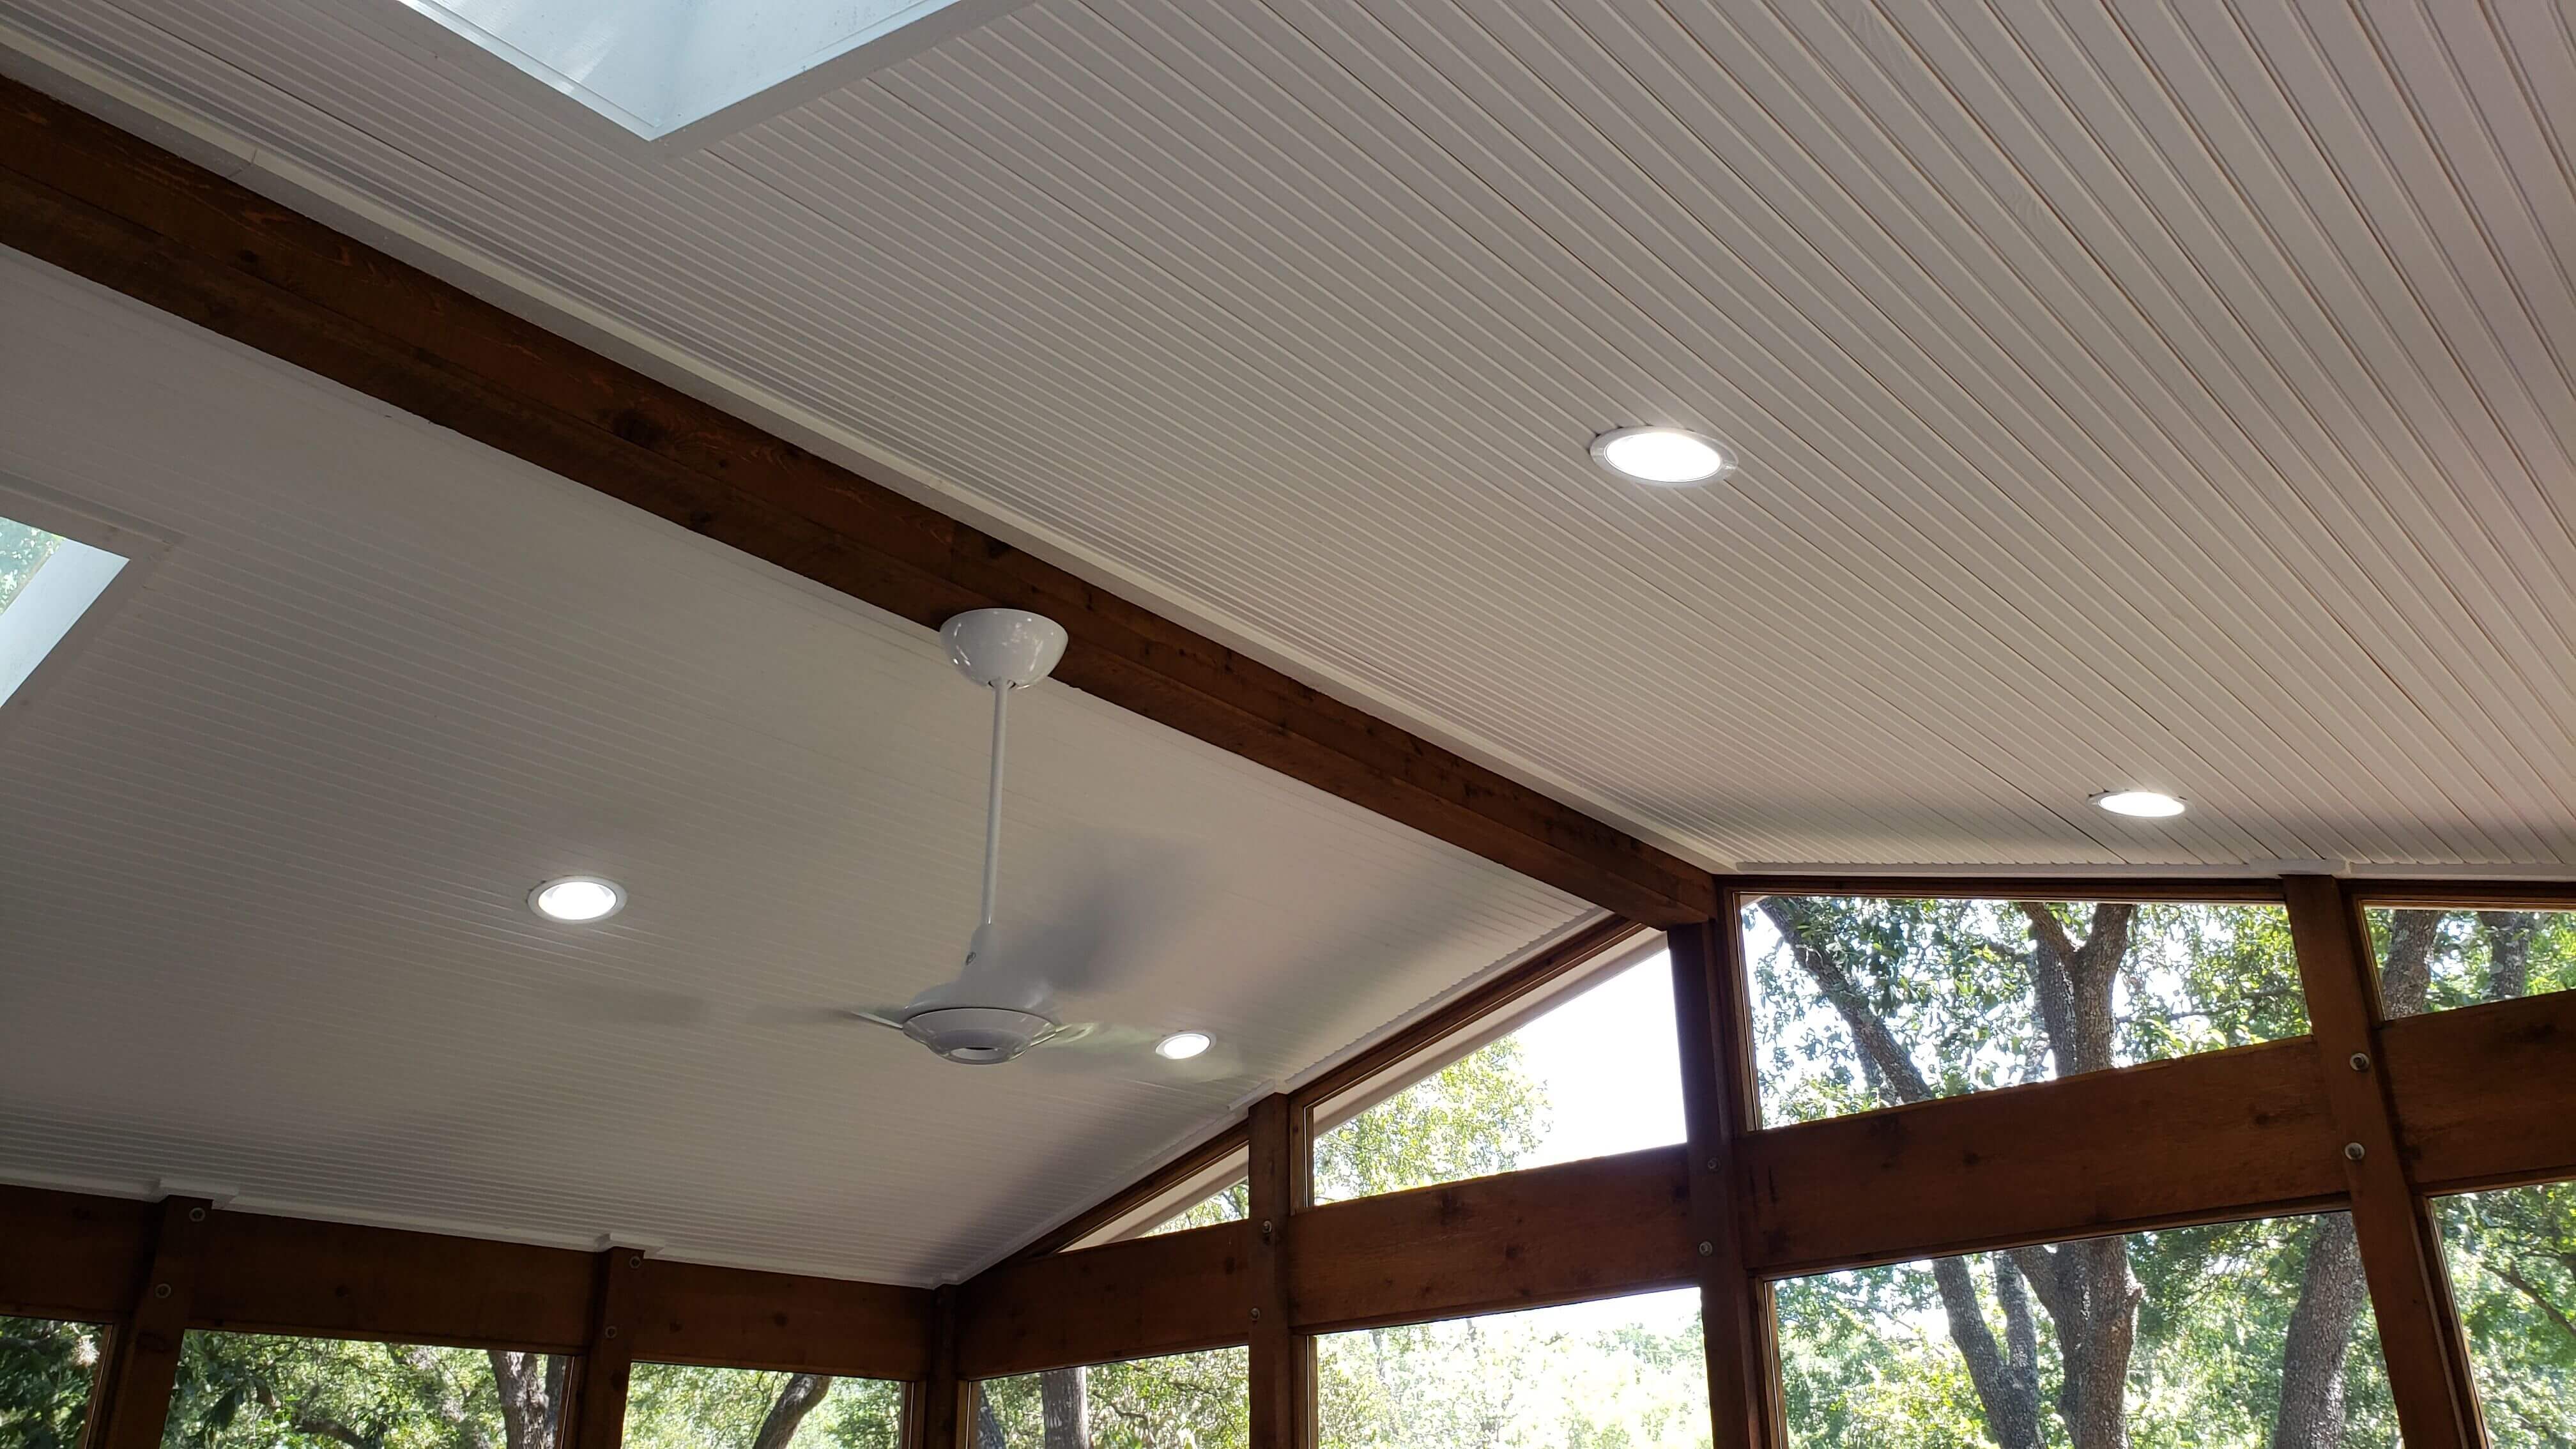 Lighting on screened porch ceiling